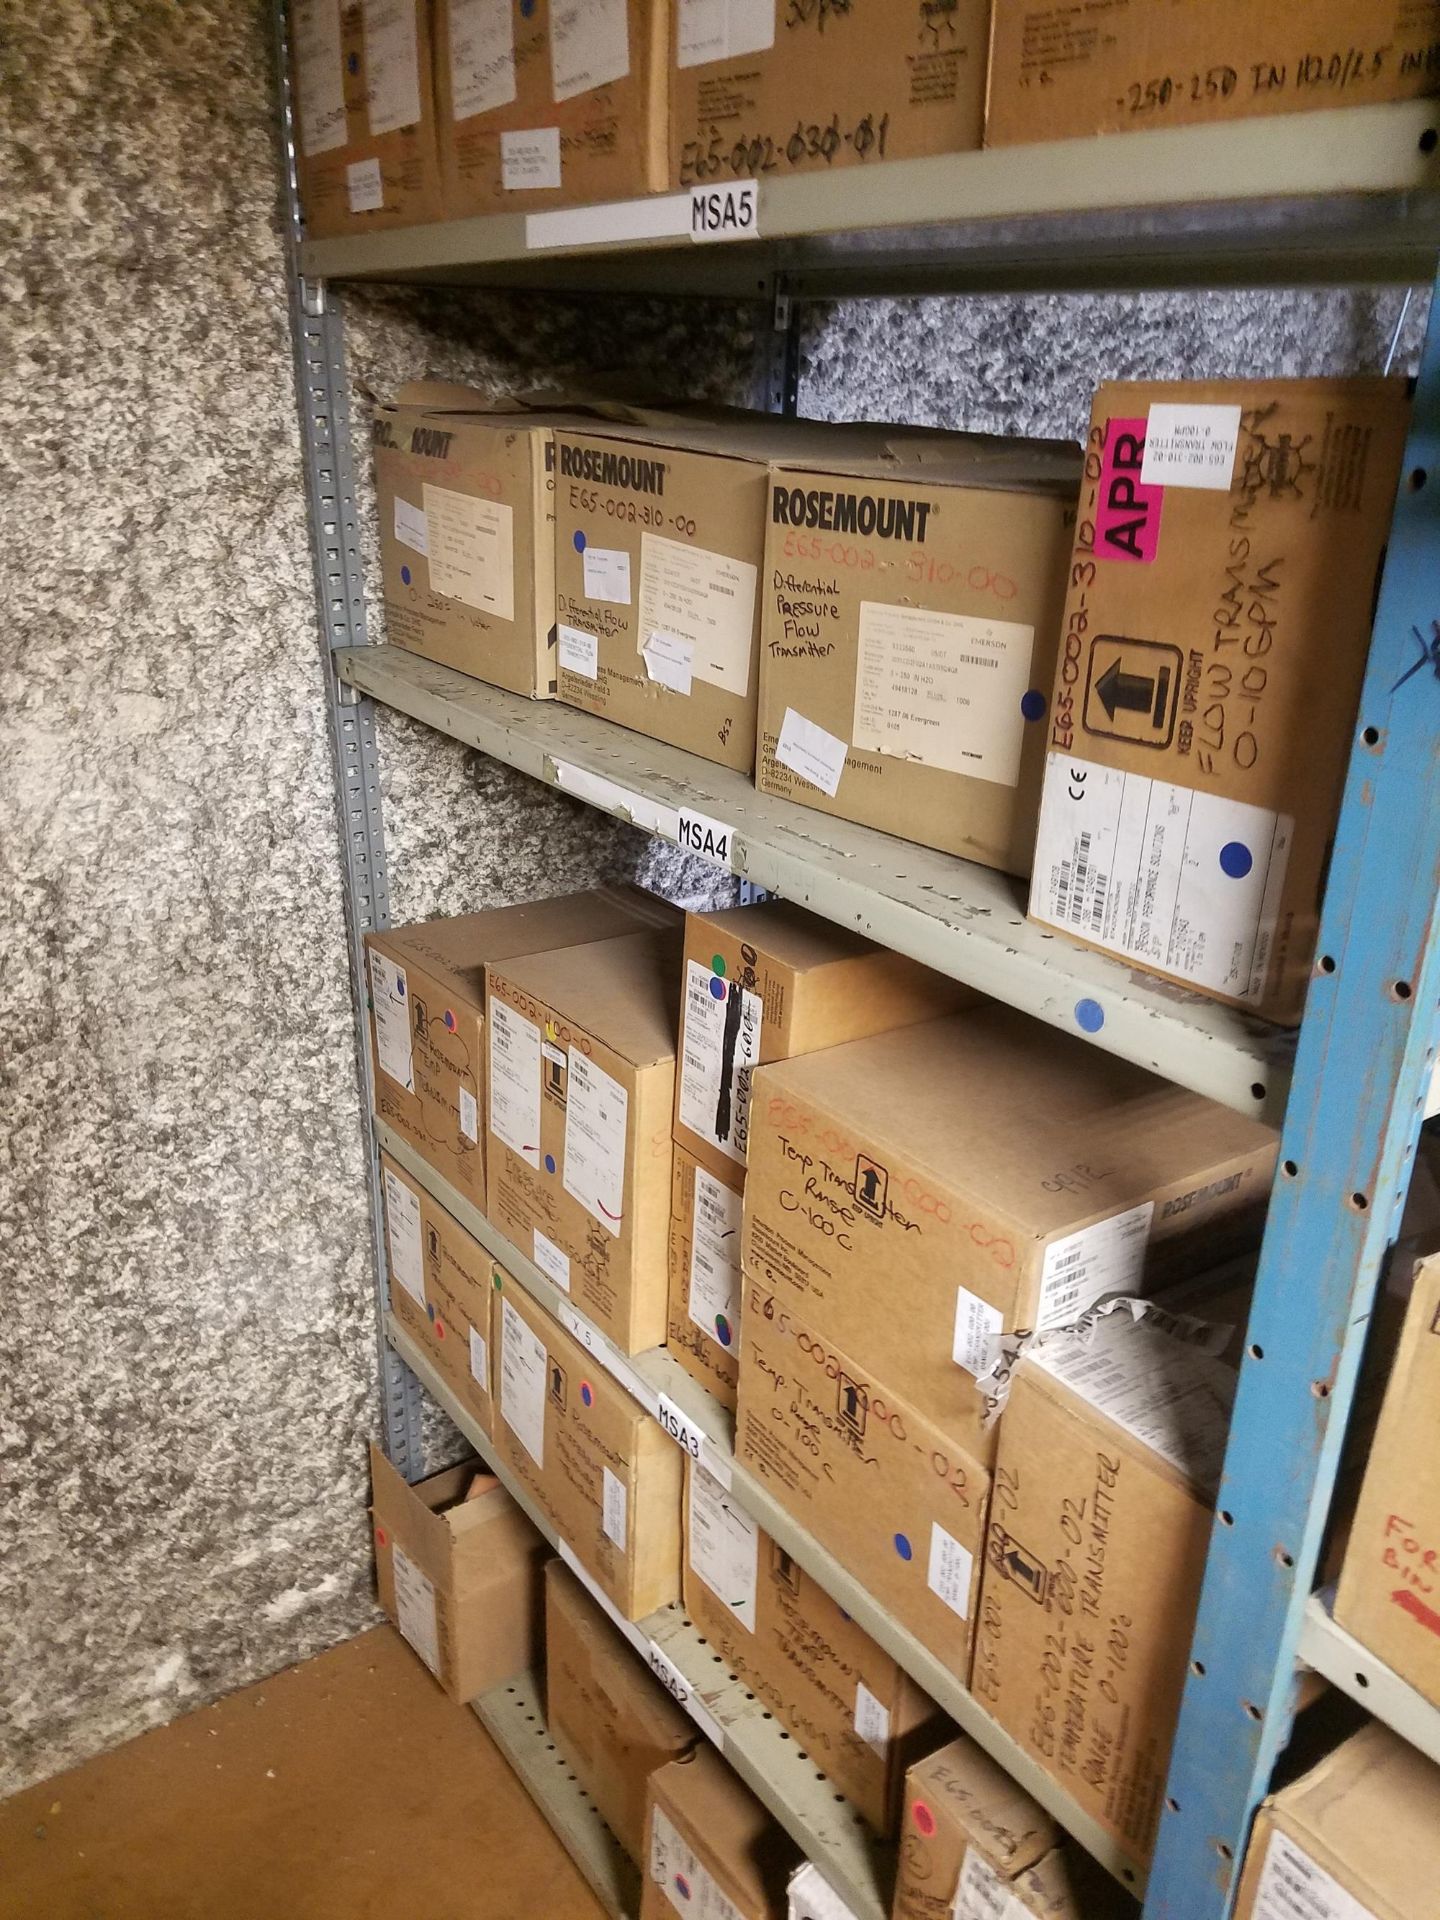 Contents of Spare Parts Storage Area On Mezzanine | Rig Fee: $400 - Image 19 of 19